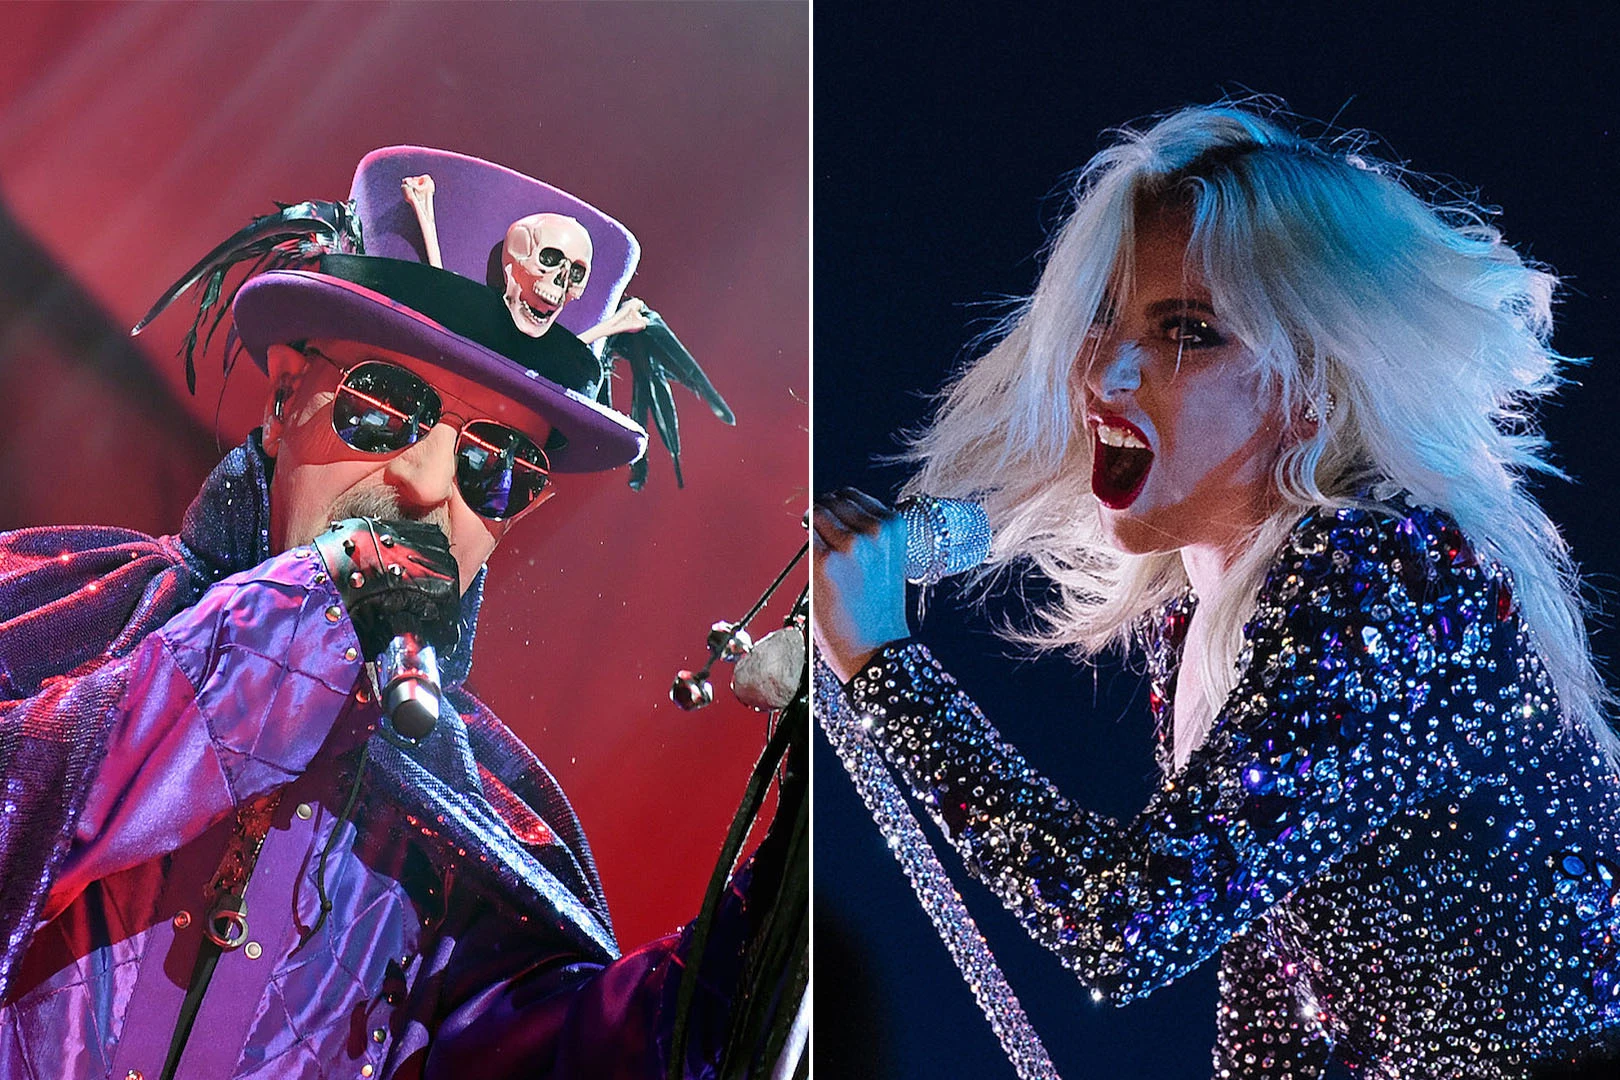 Rob Halford Names the Songs He Wants to Perform With Lady Gaga